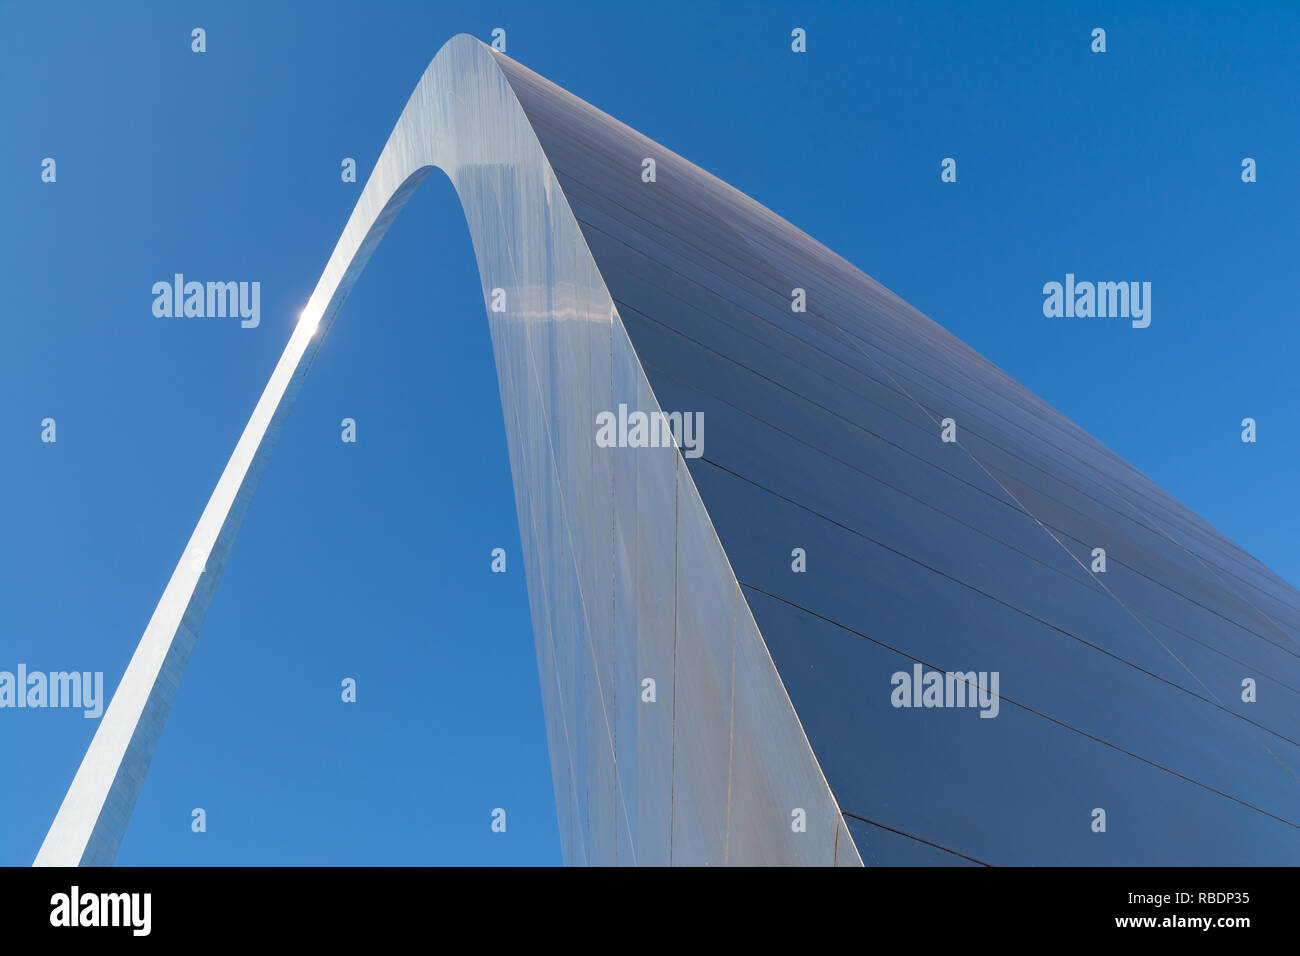 Abstract view of the Gateway Arch with brilliant blue skies in background.  St. Louis, Missouri, USA Stock Photo